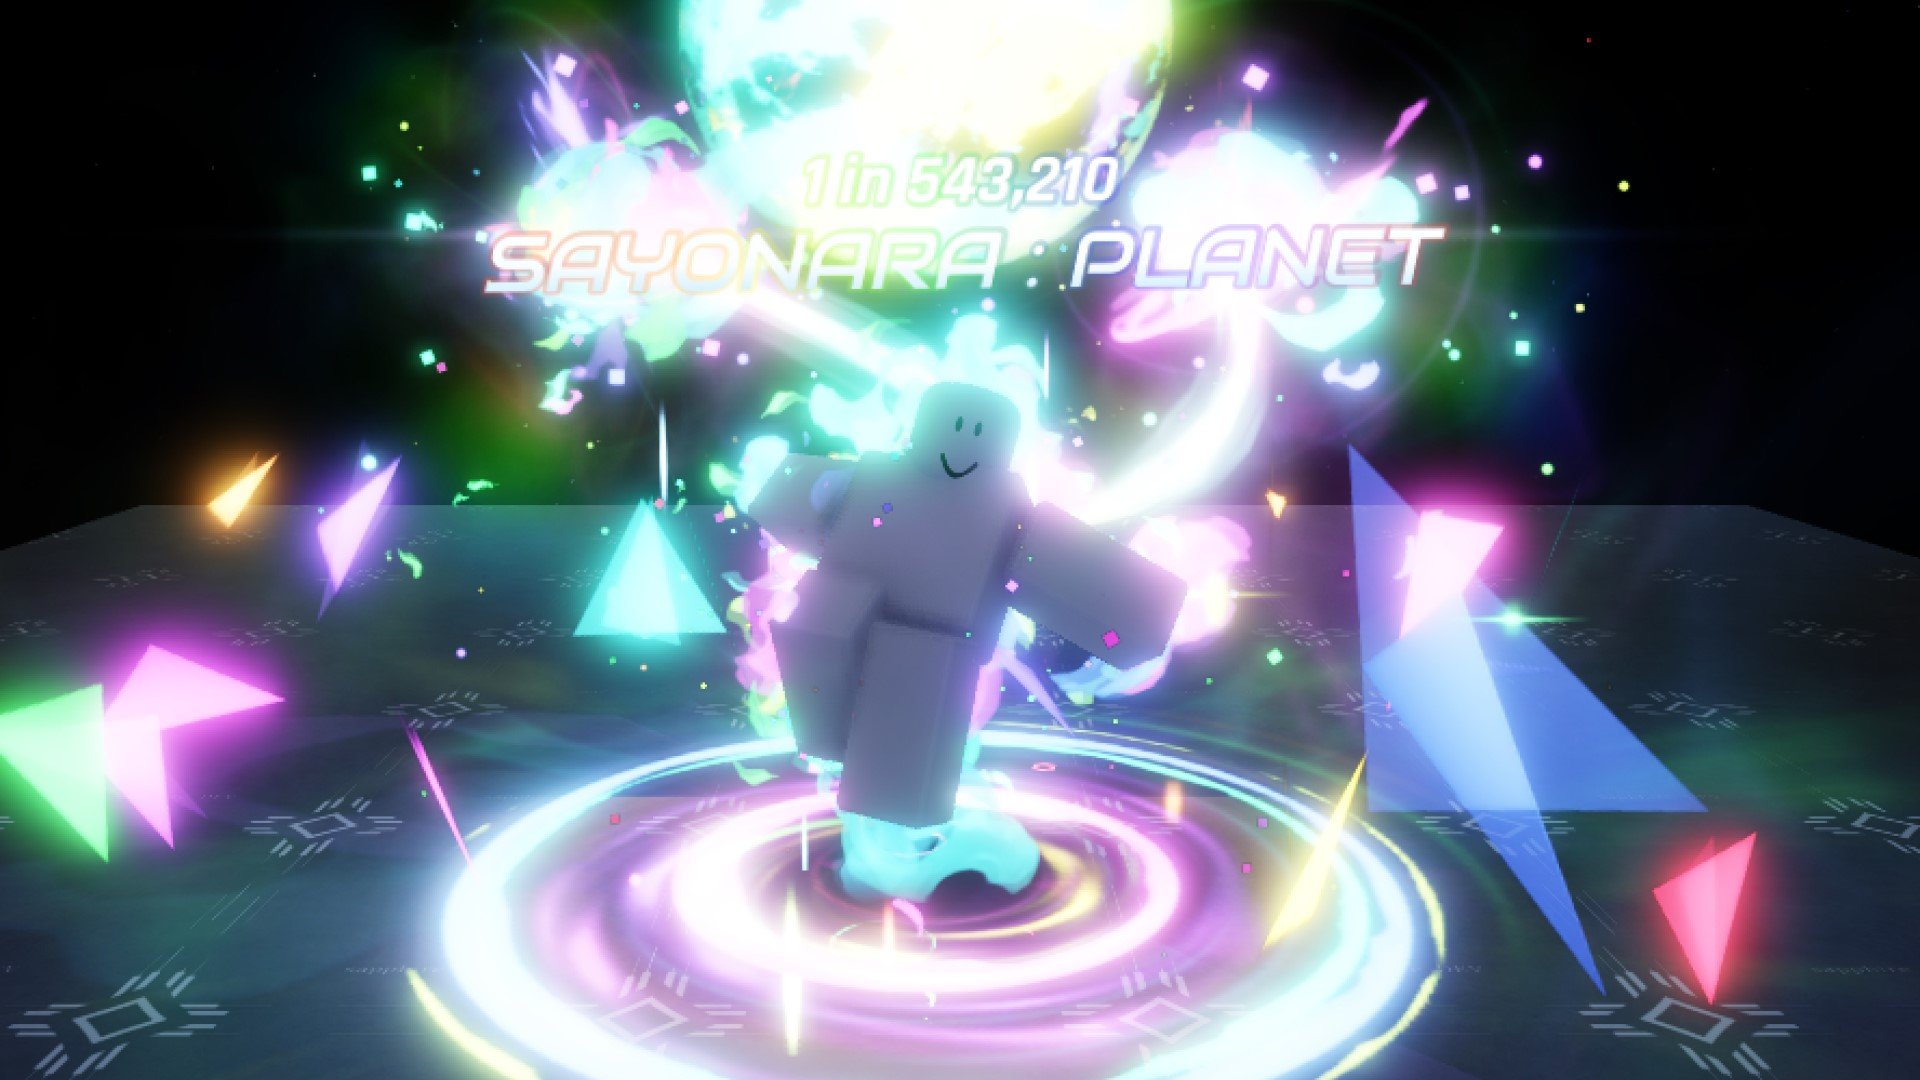 A character from Roblox game Hades RNG with the Sayonara: Planet Aura equipped.